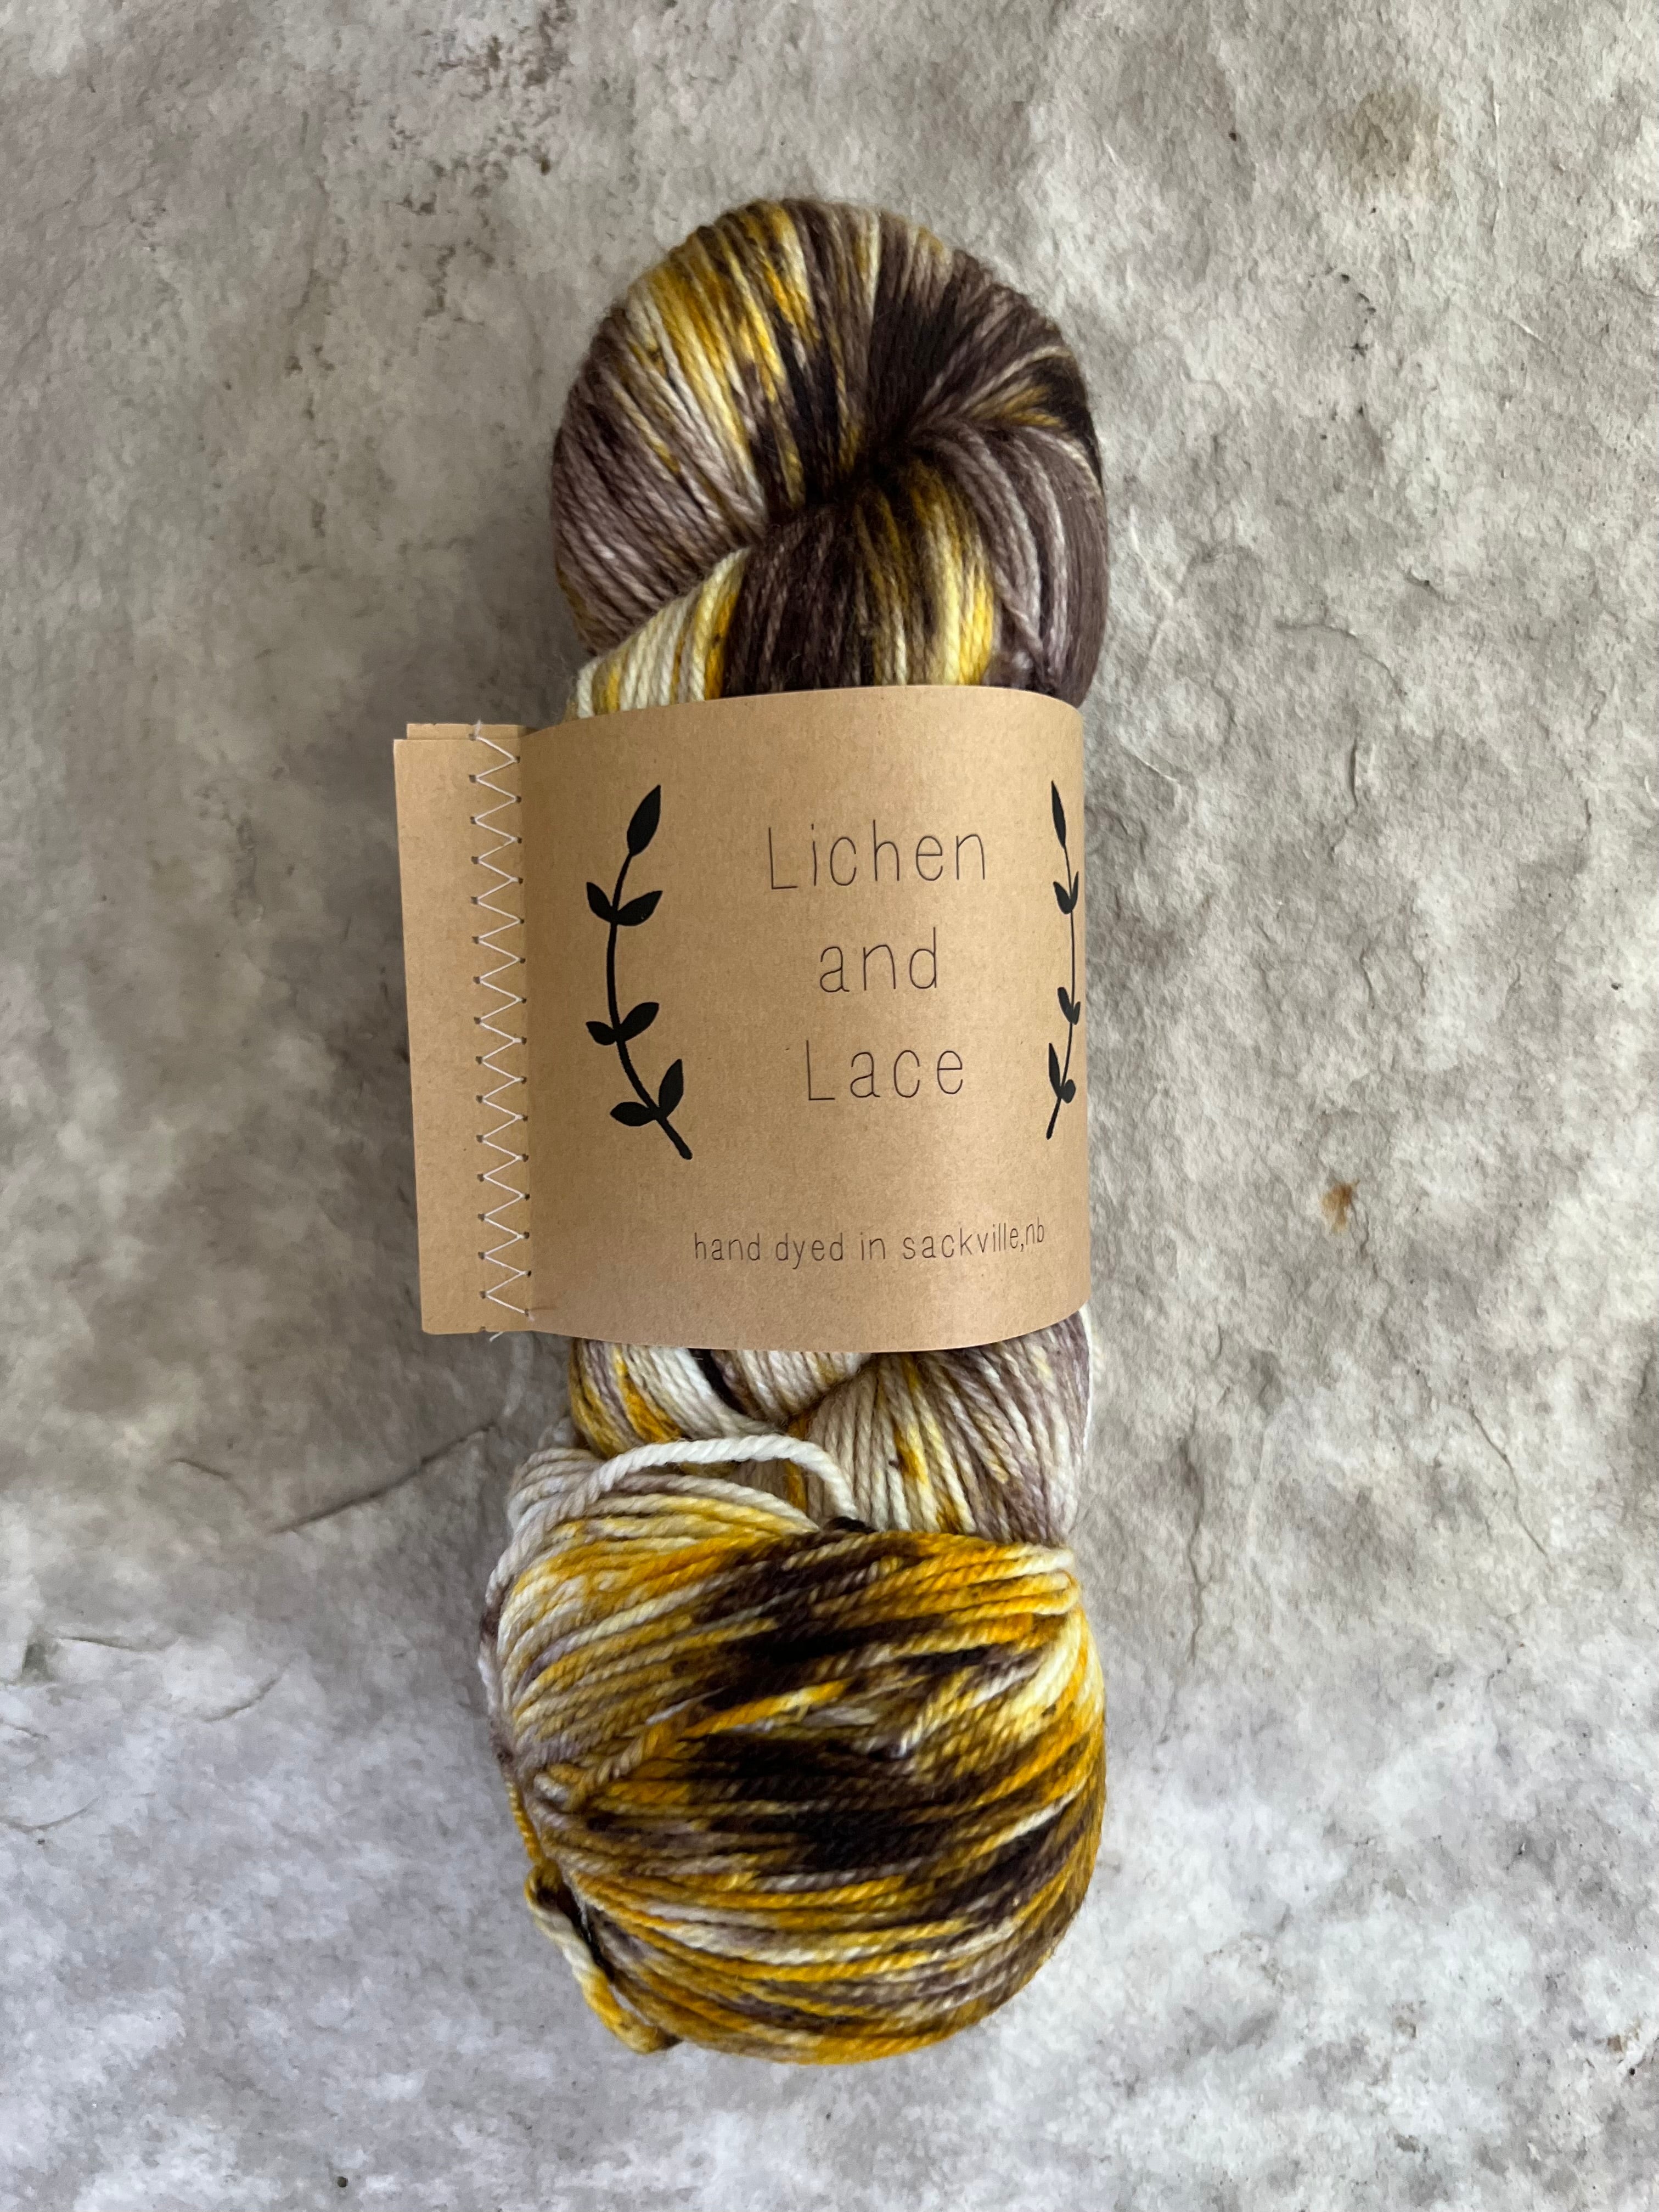 Lichen & Lace : Hand Dyed Embroidery Yarn, Lichen and Lace …